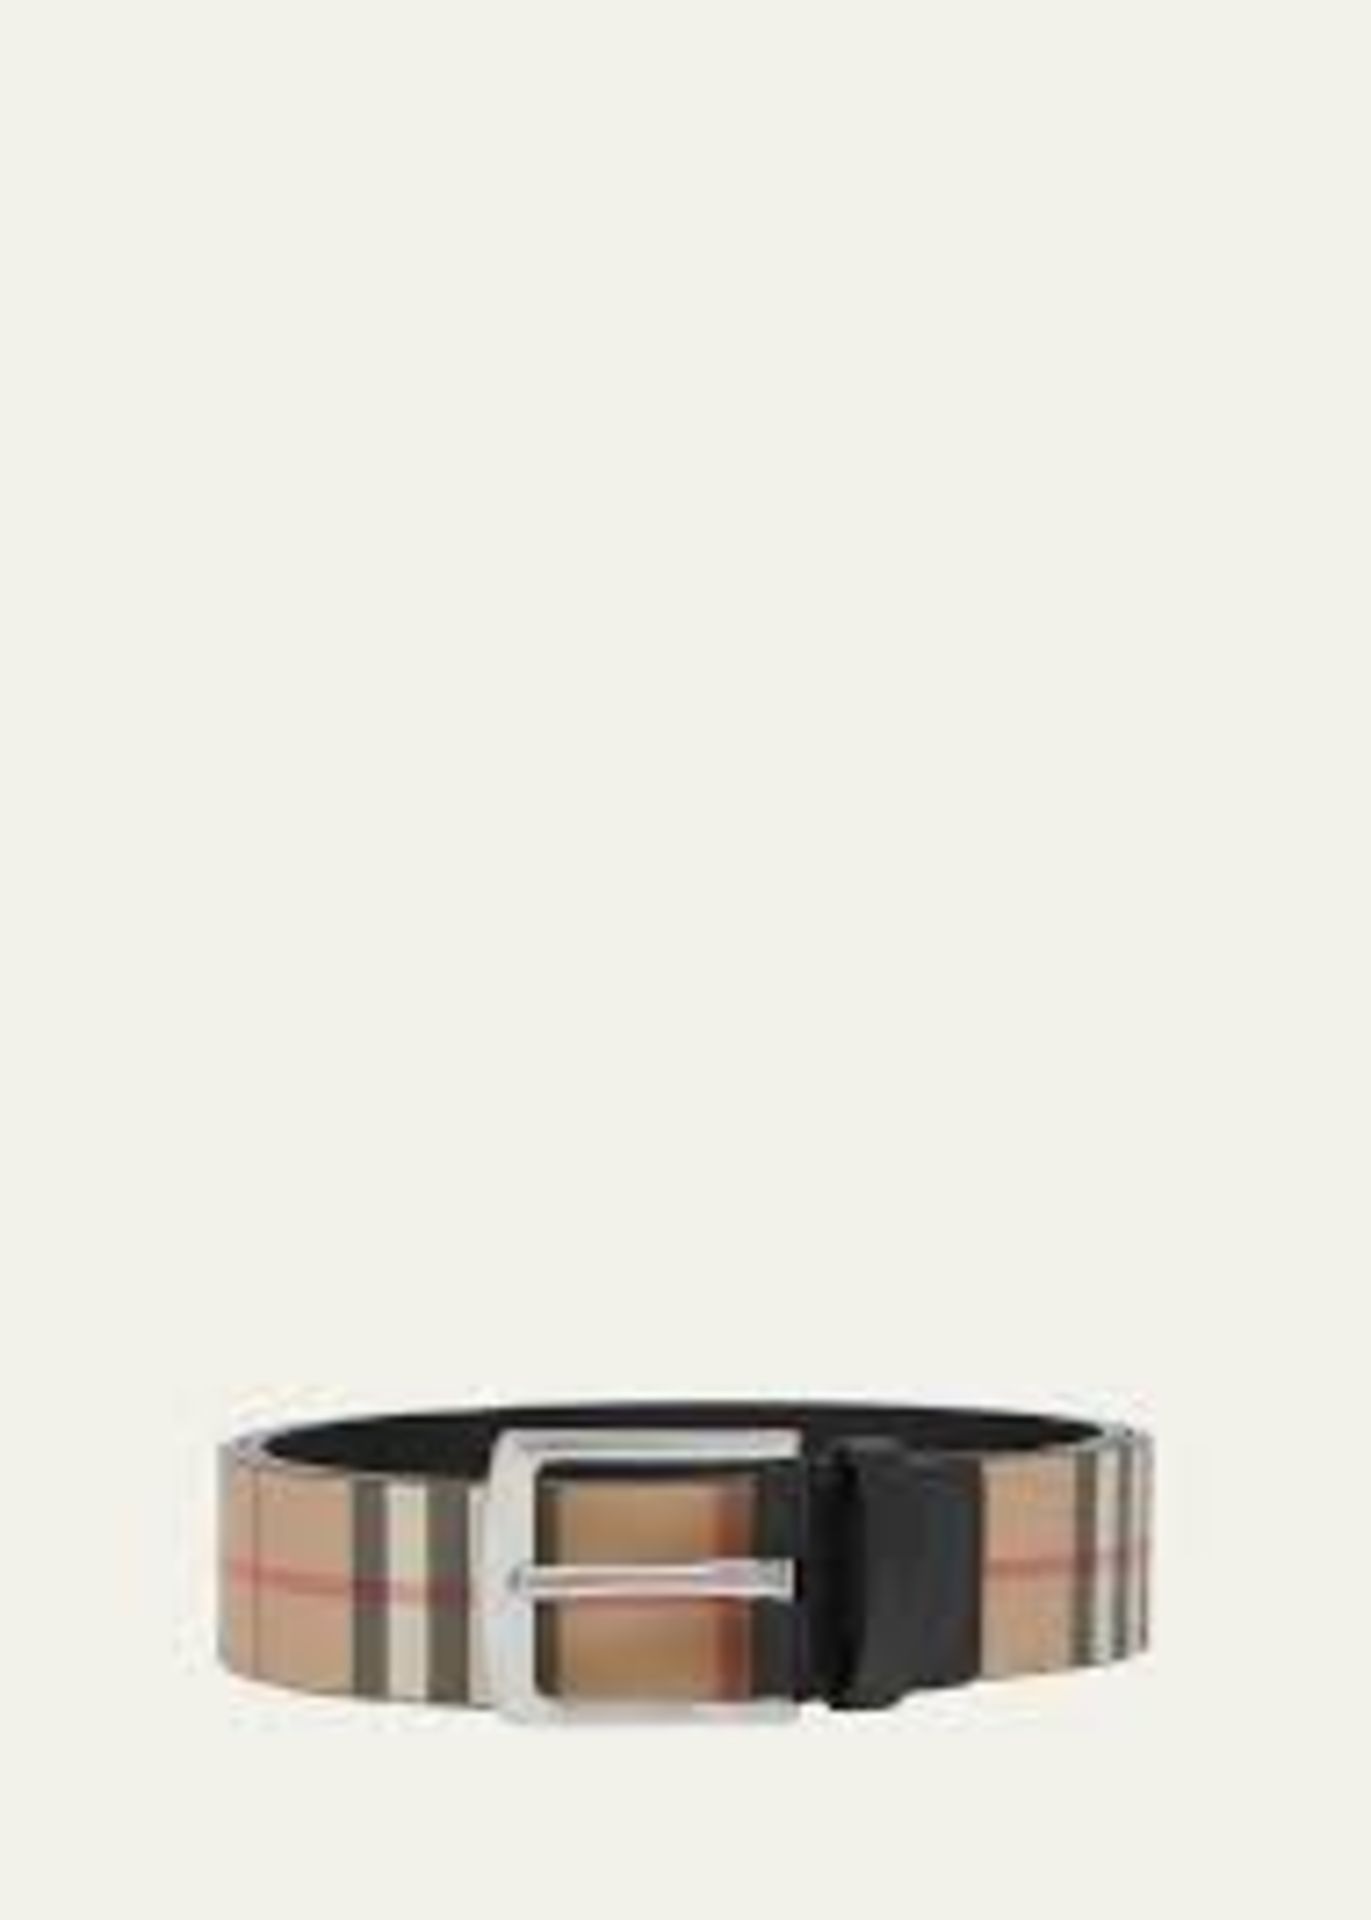 Genuine Burberry Vintage Check Belt. RRP £510. Single prong buckle Adjustable fit Cotton/leather/ - Image 2 of 7